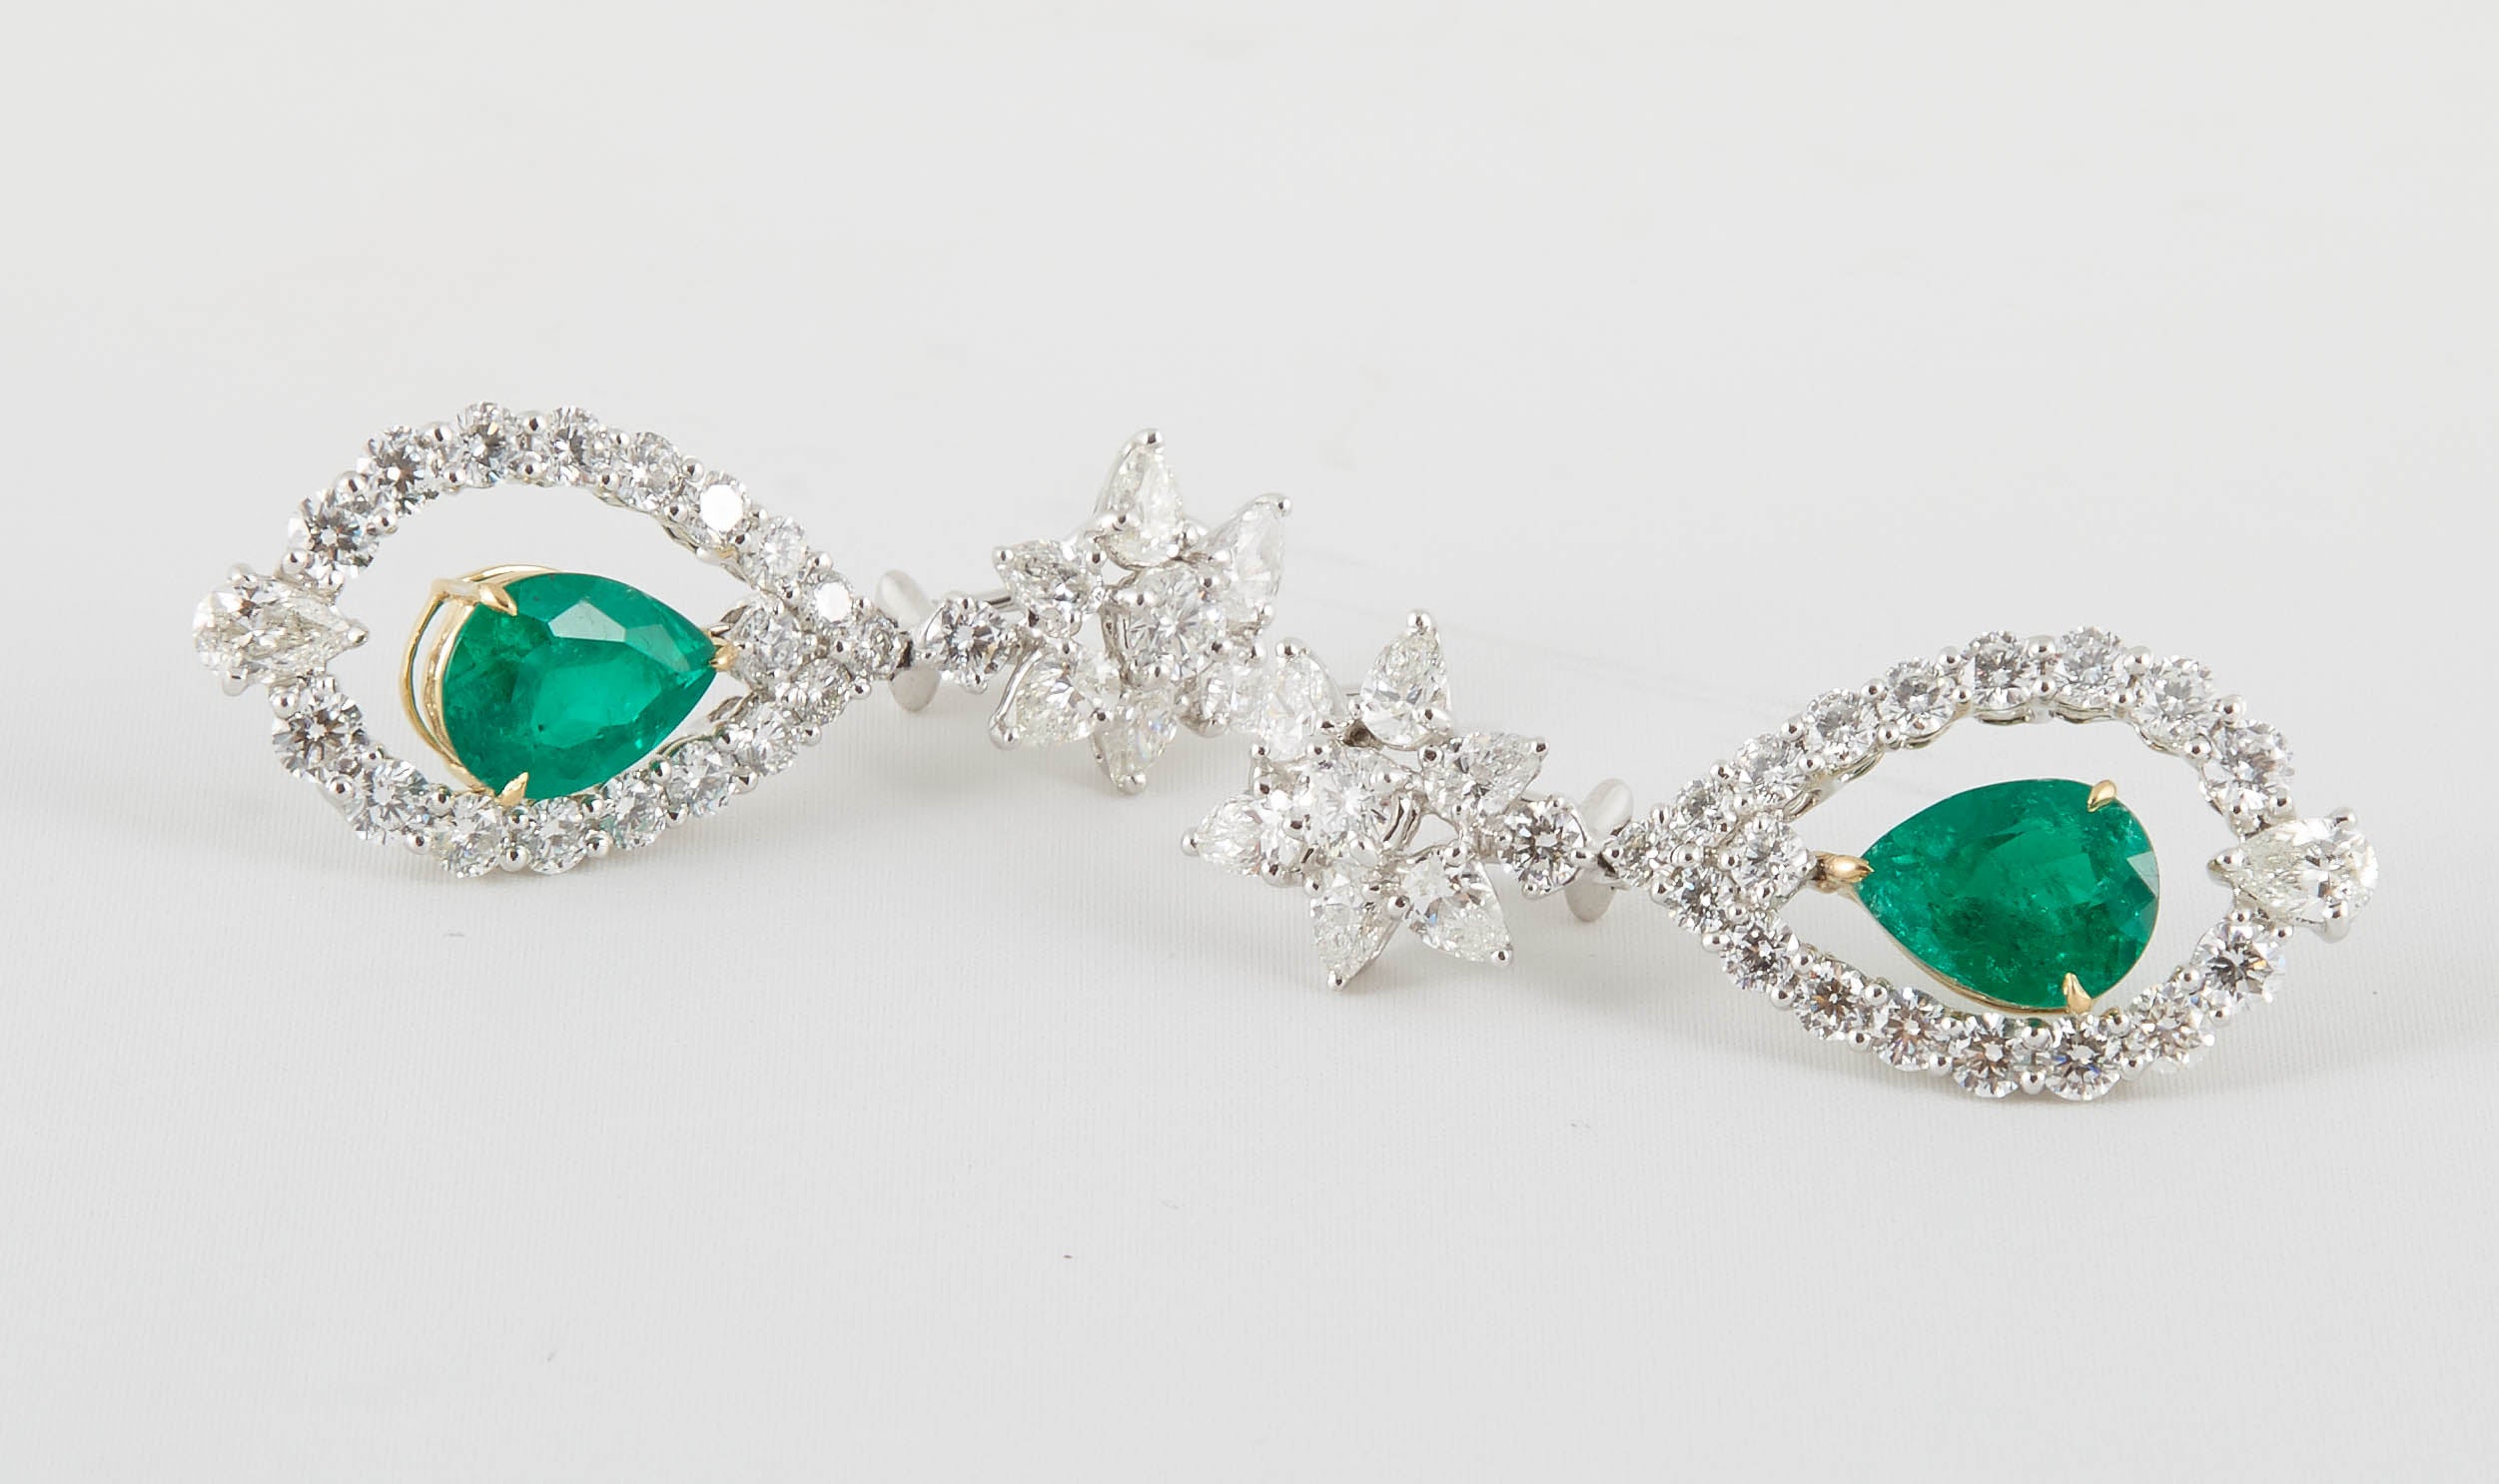 6.05 carats of Fine Colombian Emeralds

8.82 carats of white brilliant pear shaped and round diamonds.

Platinum and 18k yellow gold.